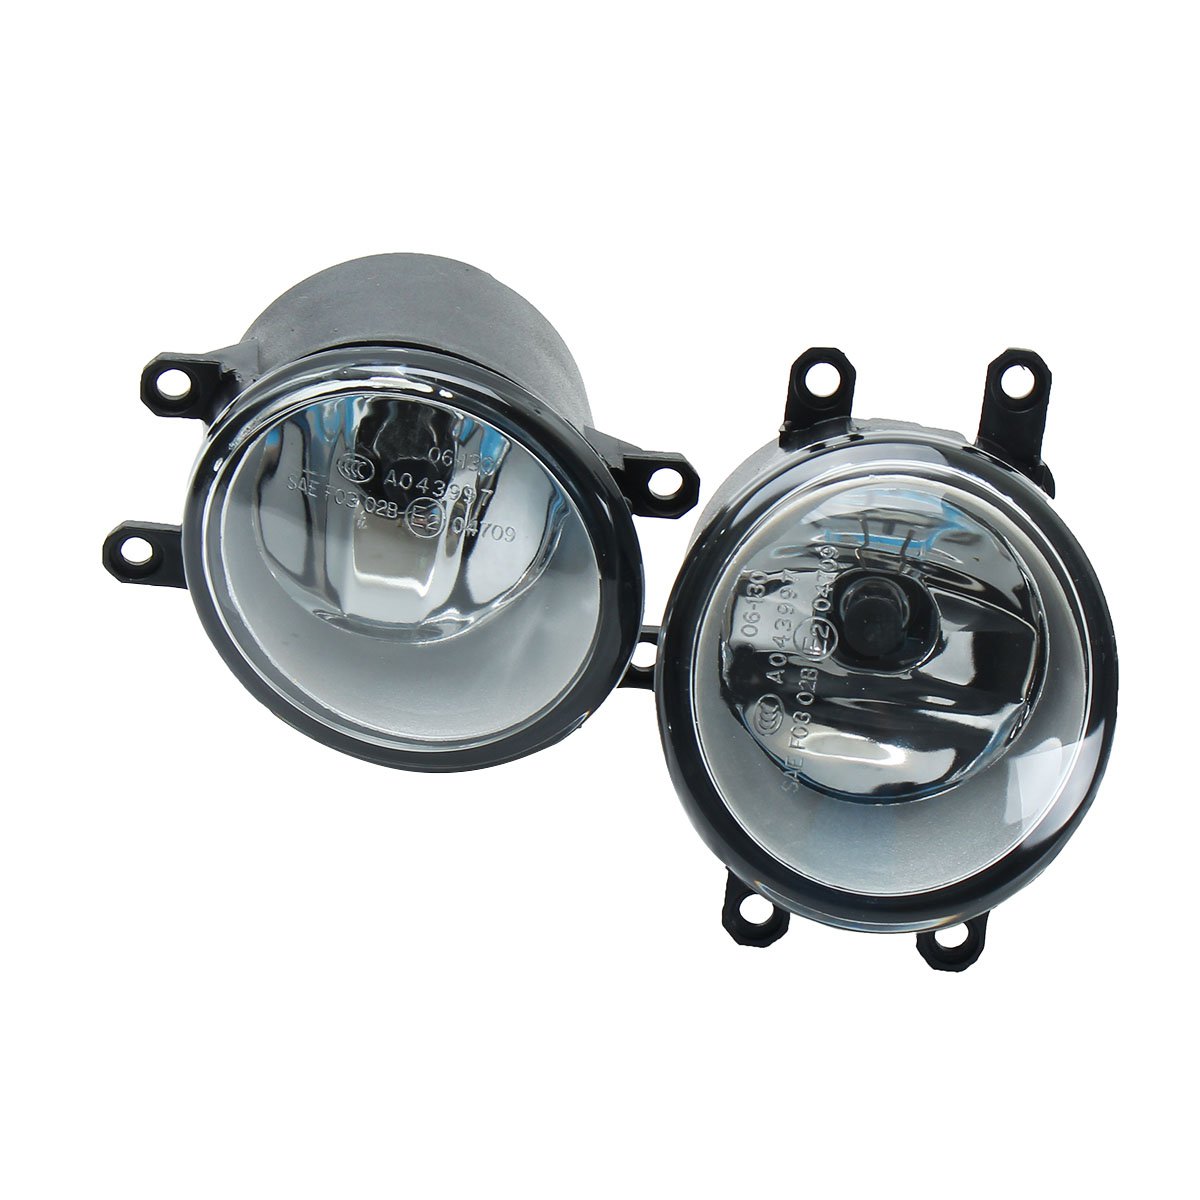 Car-Front-Bumper-Fog-Lights-with-H11-Bulbs-Wiring-Harness-6000K-Pair-for-Toyota-Yaris-4DR-Sedan-2006-939397